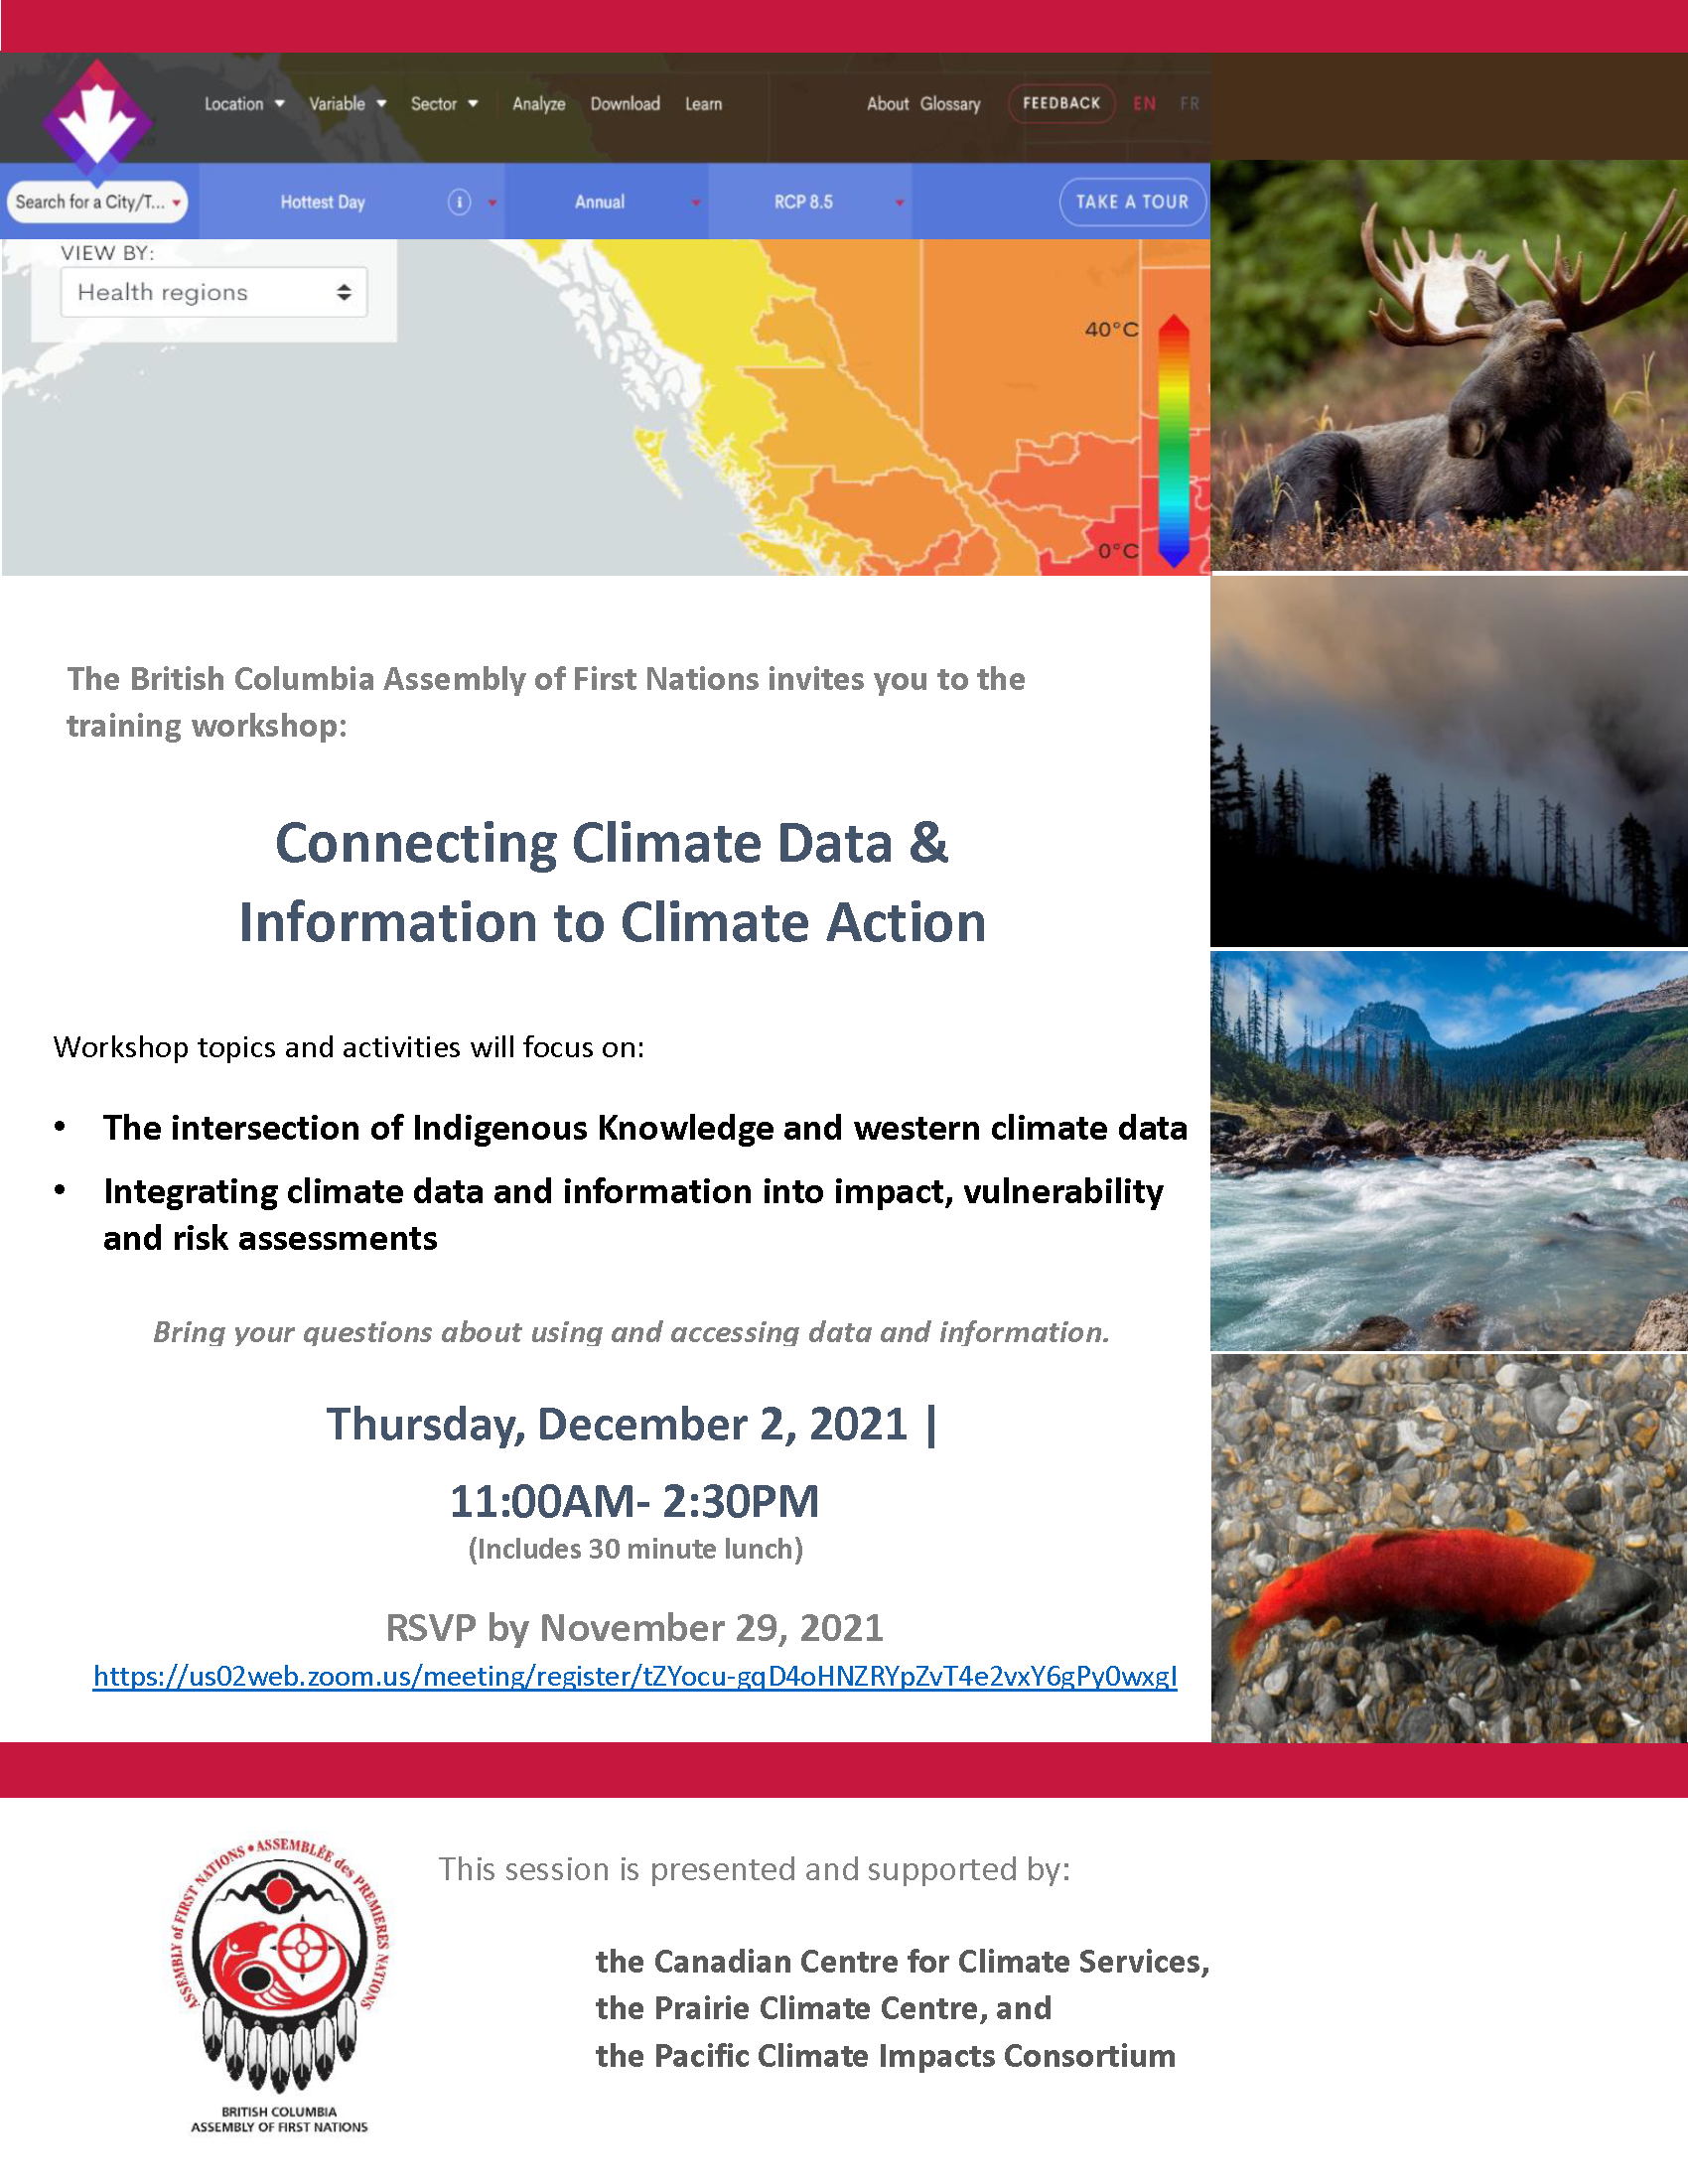 Connecting Climate Data and Information to Climate Action Poster